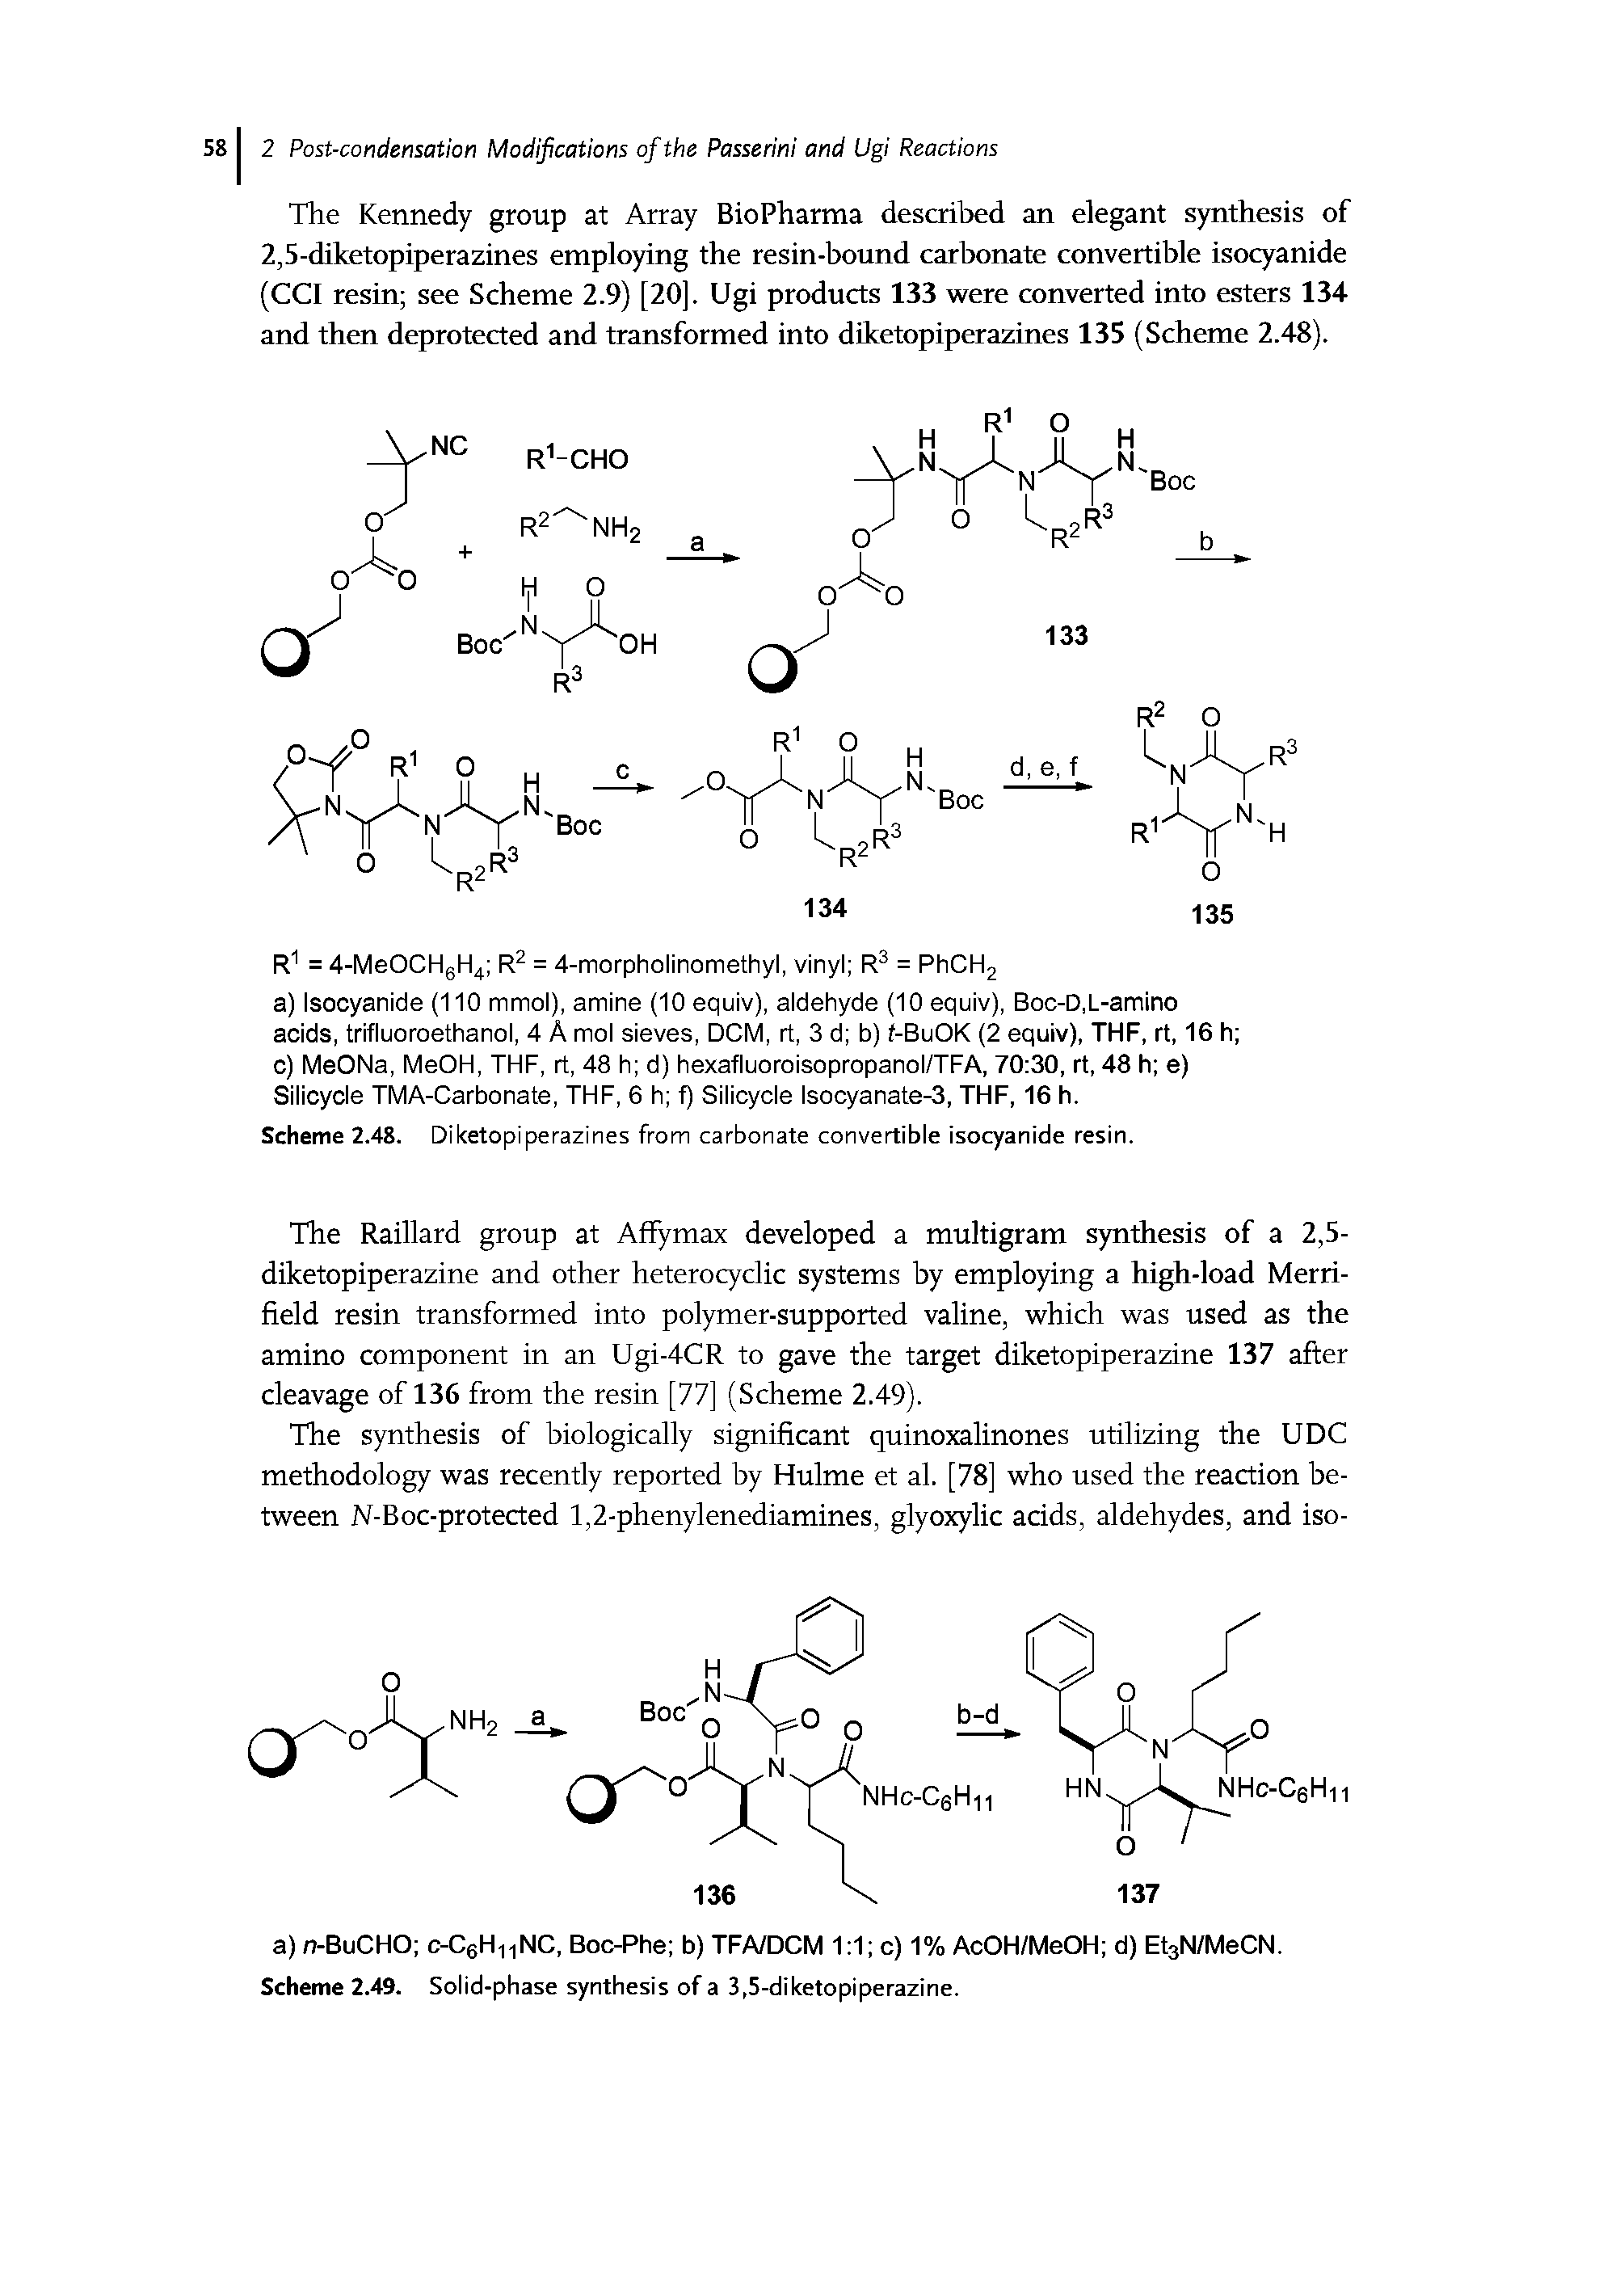 Scheme 2.48. Diketopiperazines from carbonate convertible isocyanide resin.